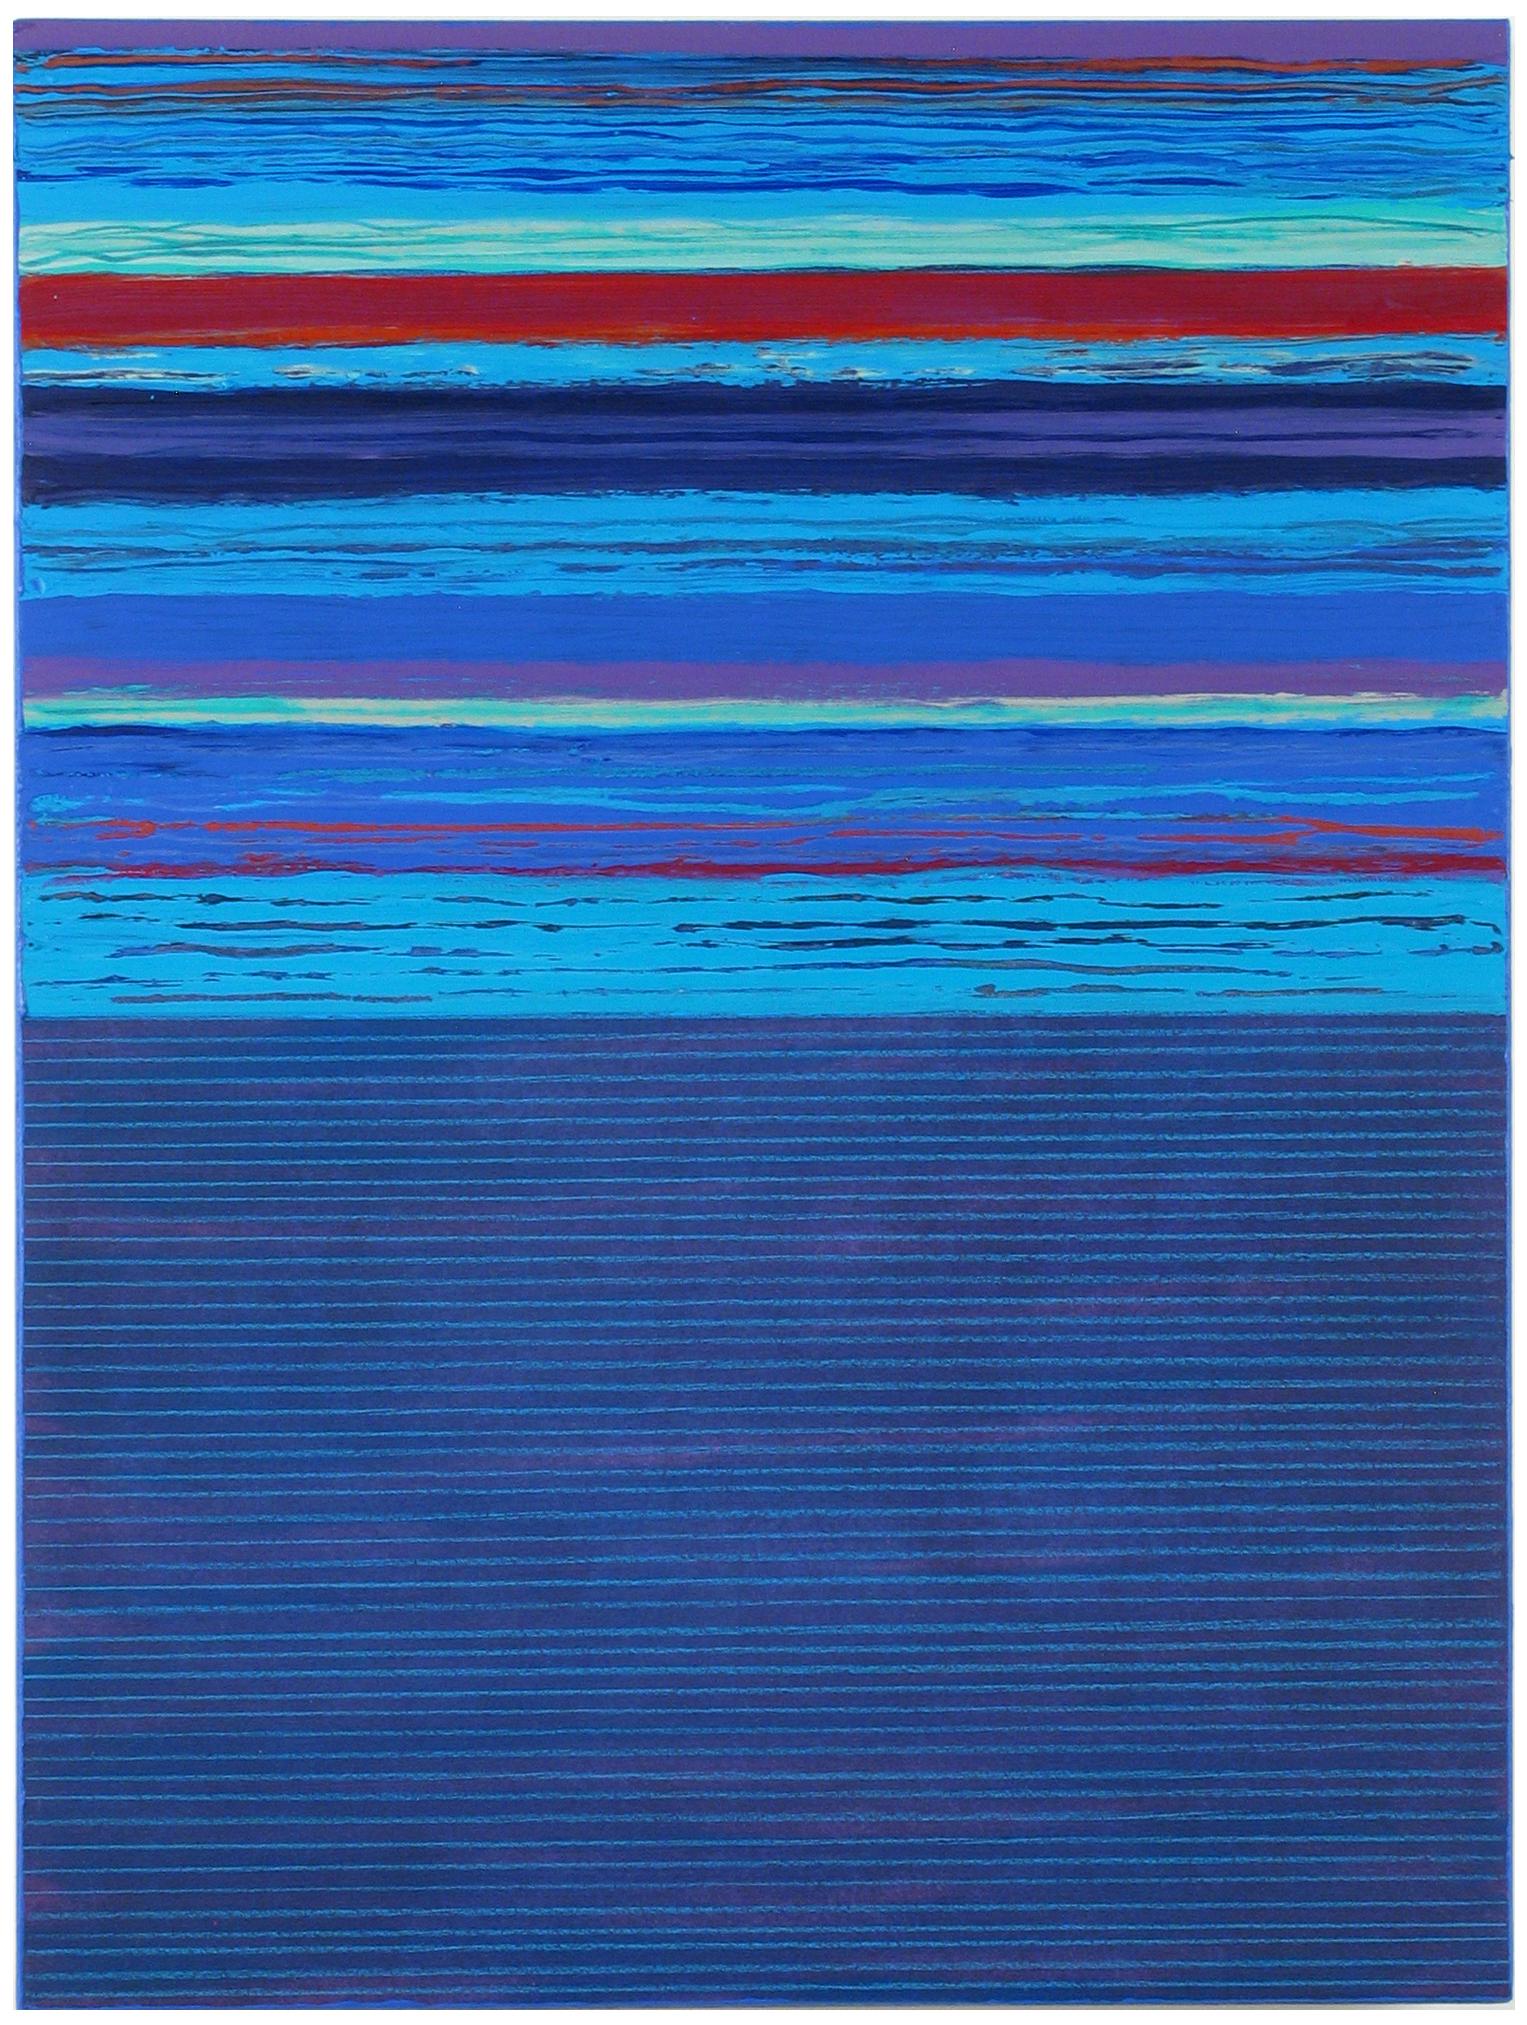 Tutto Three, Cobalt Blue, Burgundy Red, Mint Green, Teal Stripes Mixed Media - Painting by Joanne Mattera